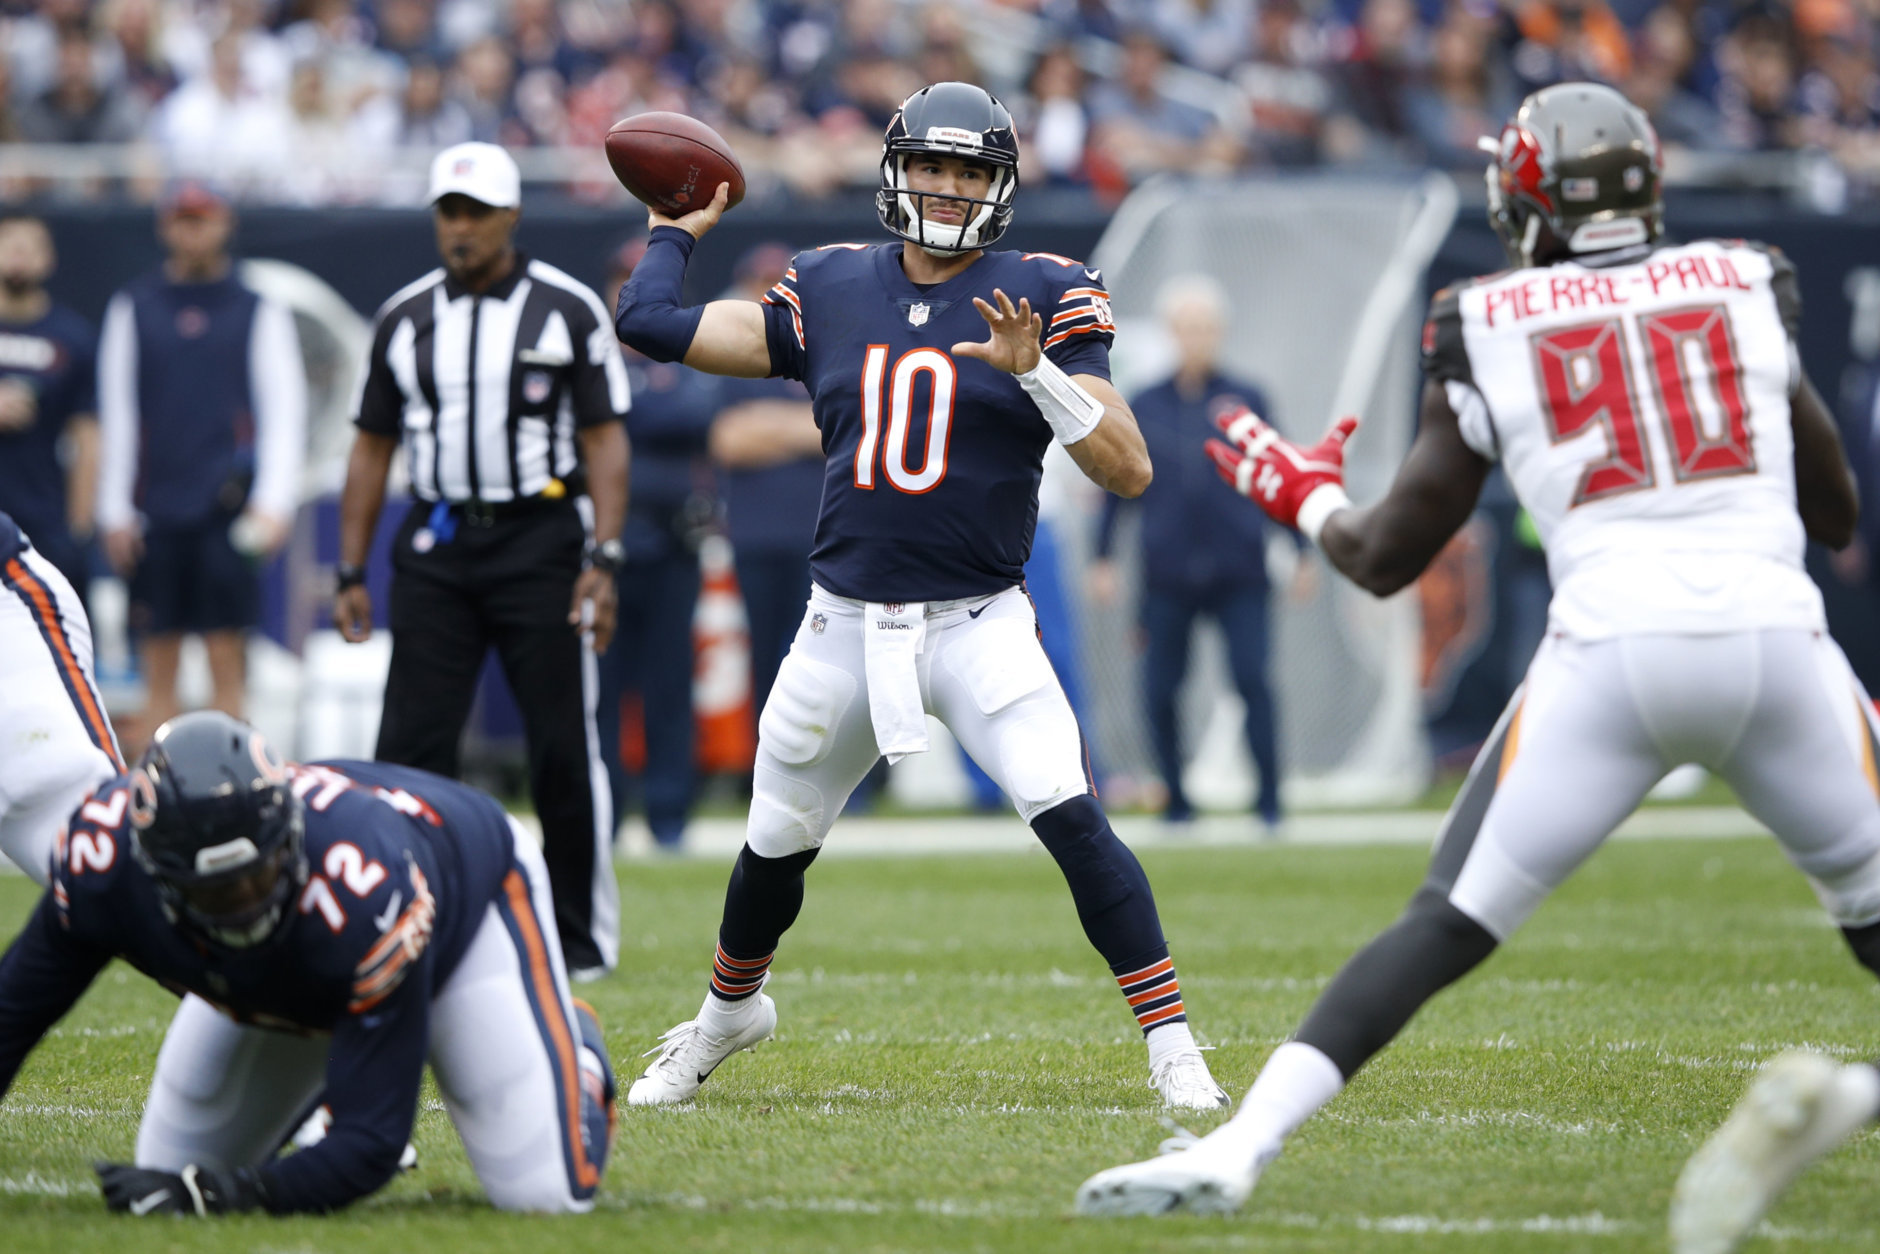 CHICAGO, IL - SEPTEMBER 30:  Quarterback Mitchell Trubisky #10 of the Chicago Bears passes the football against the Tampa Bay Buccaneers in the first quarter at Soldier Field on September 30, 2018 in Chicago, Illinois.  (Photo by Joe Robbins/Getty Images)